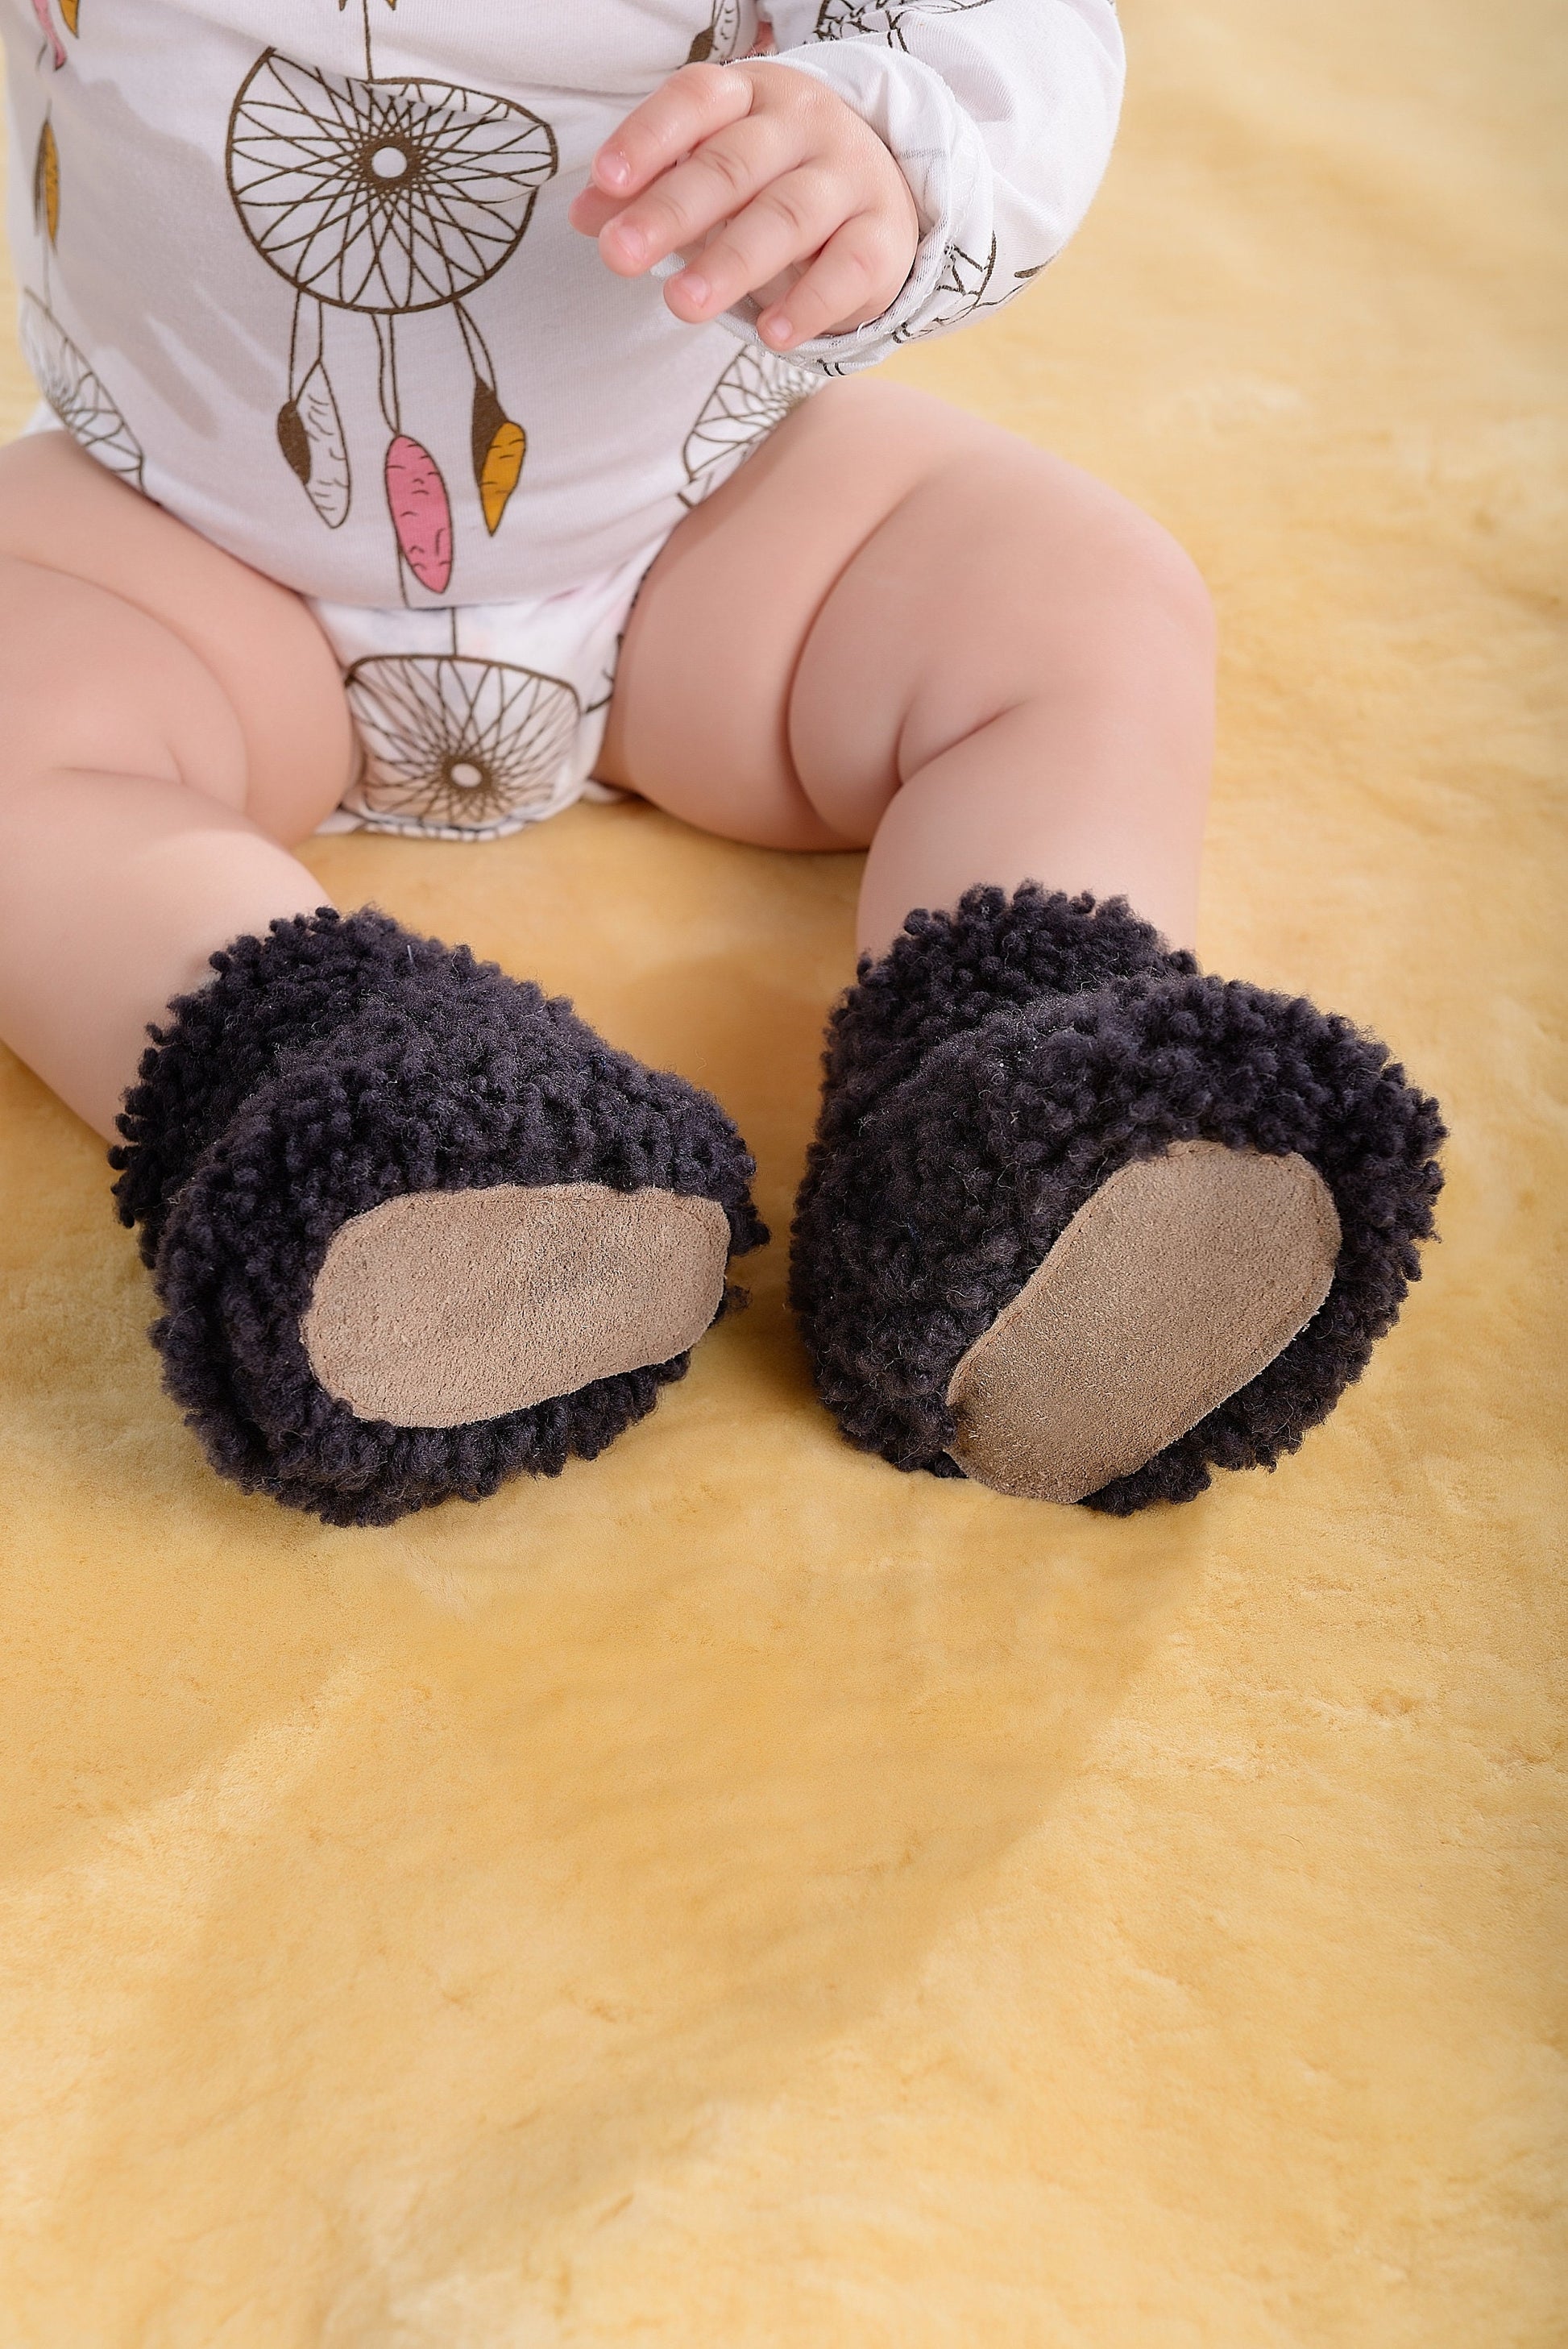 Real Sheepskin Baby Boots 0-18 months Unisex-Child Baby Winter Shoes in Aubergine Color